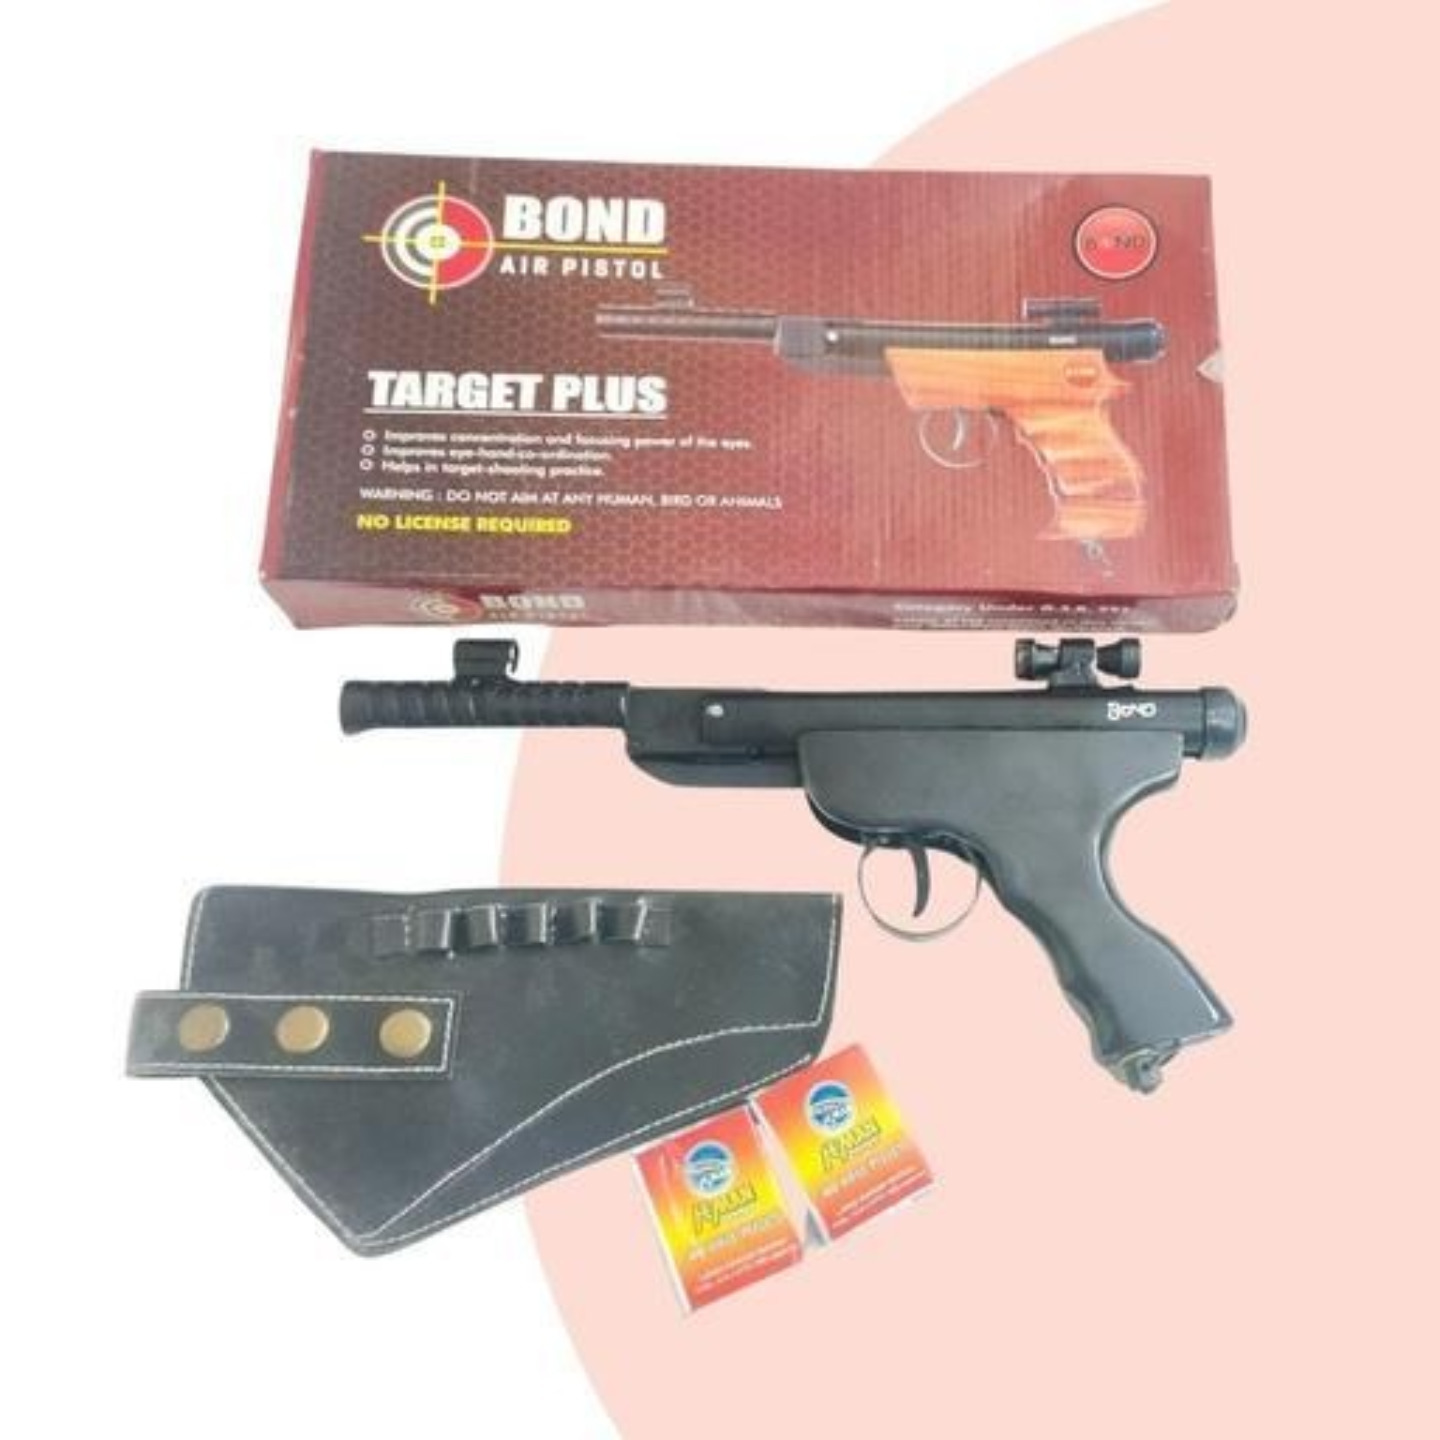 Bond Air Pistol Target Plus with pistol cover and 100 pellets No license required